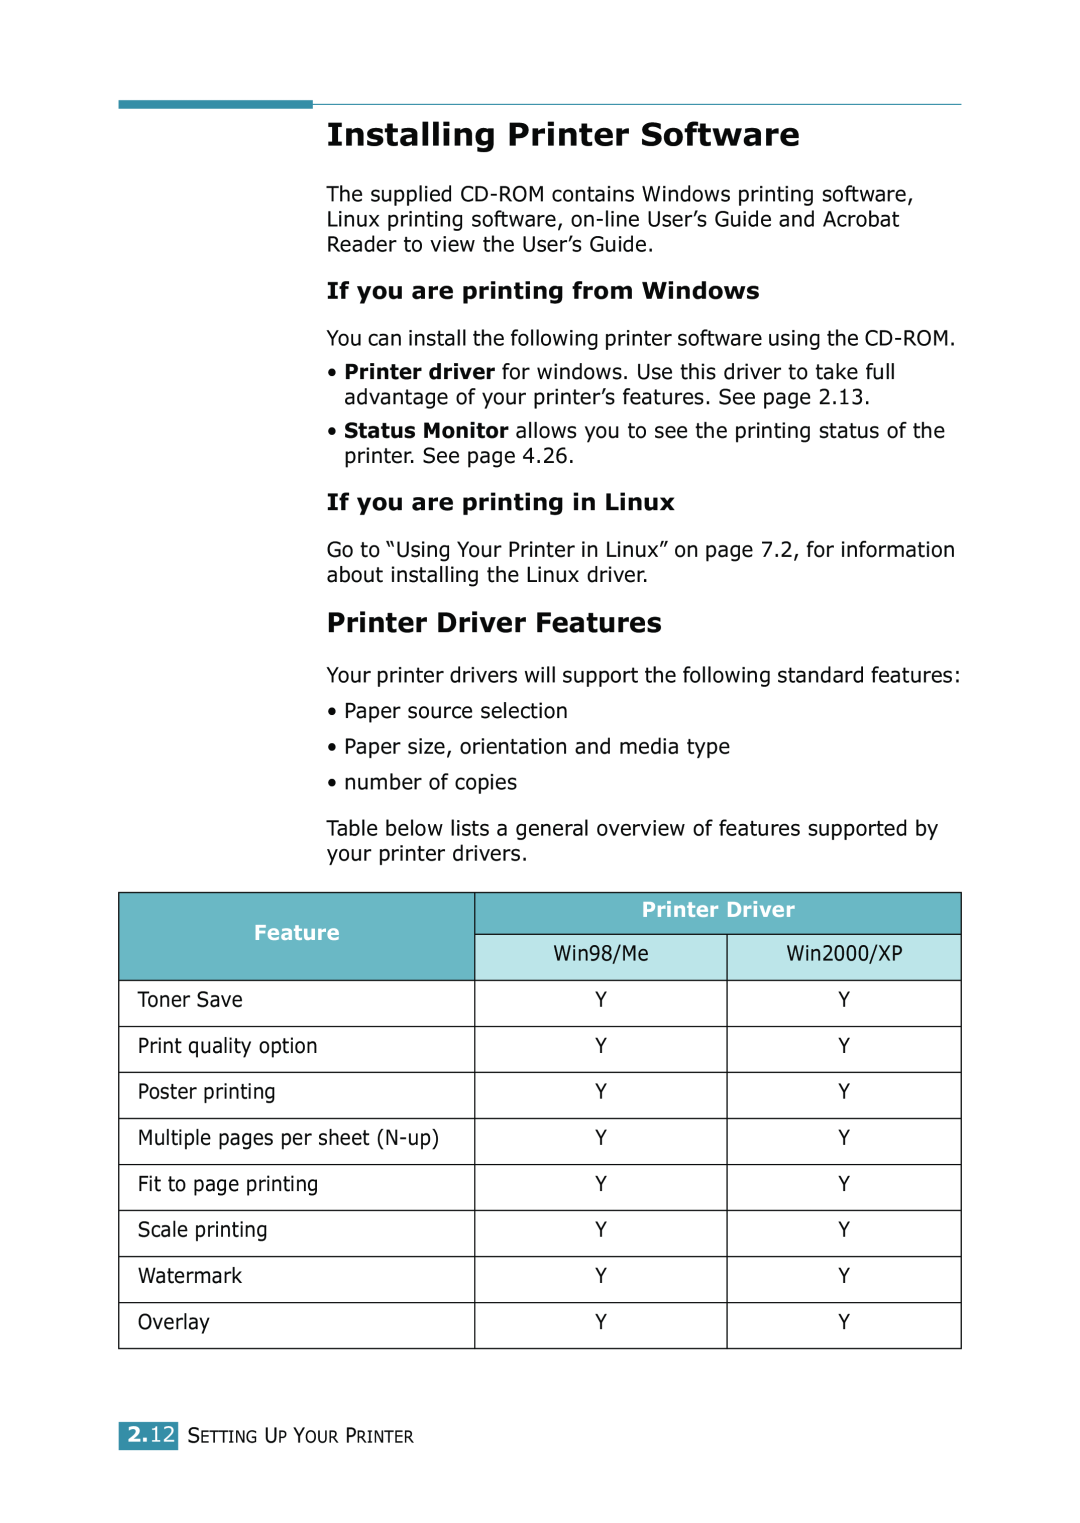 Samsung ML-1520 manual Installing Printer Software, Printer Driver Features, If you are printing from Windows 